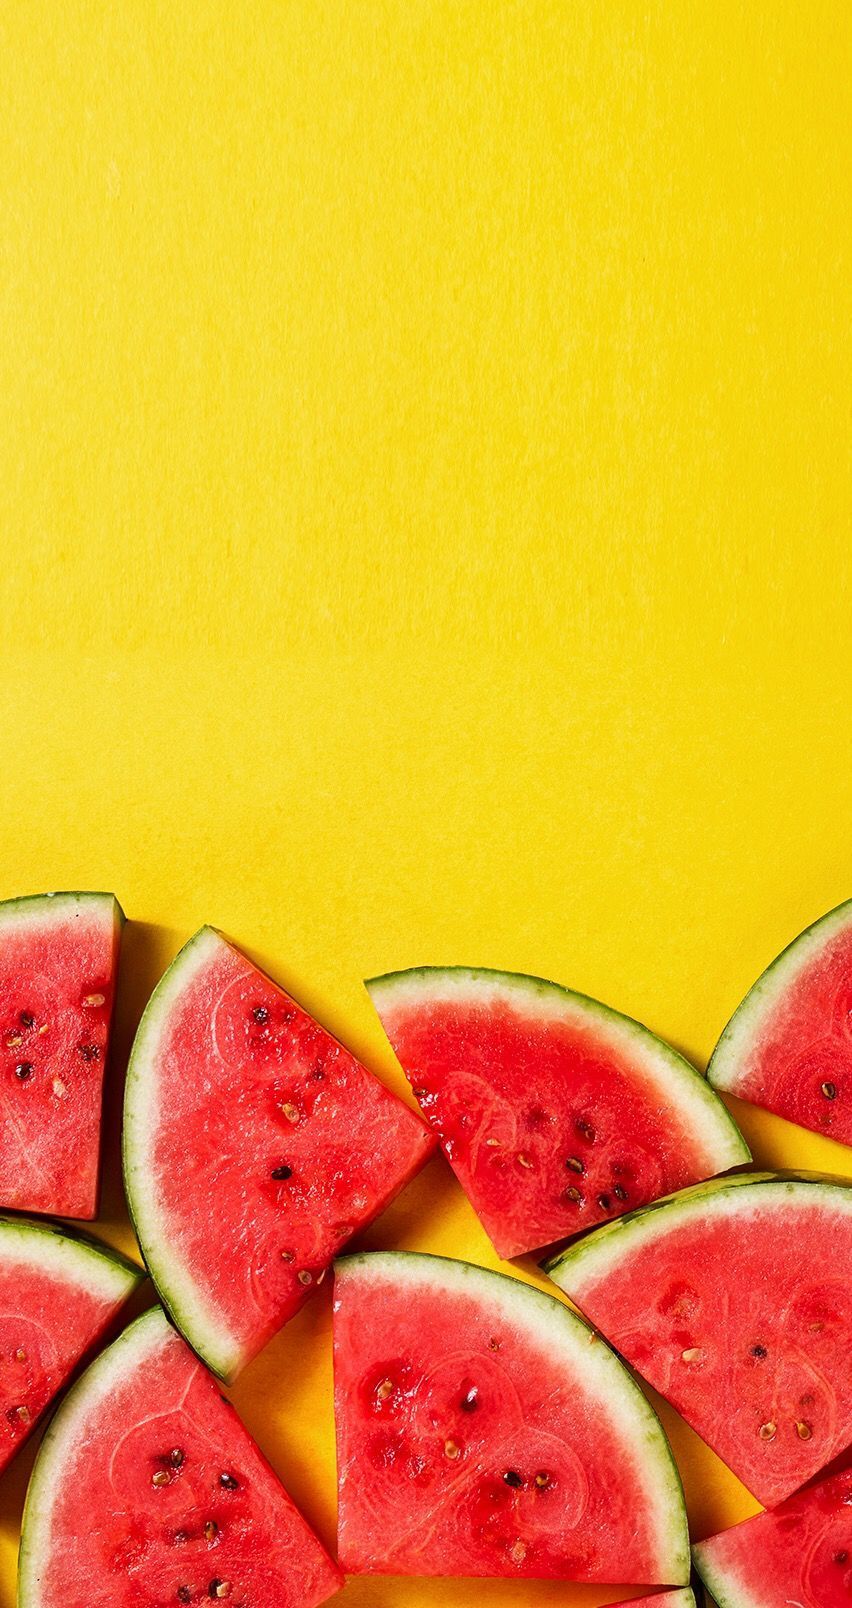 Summer Cute Fruit Wallpaper Background Wallpaper Image For Free Download   Pngtree